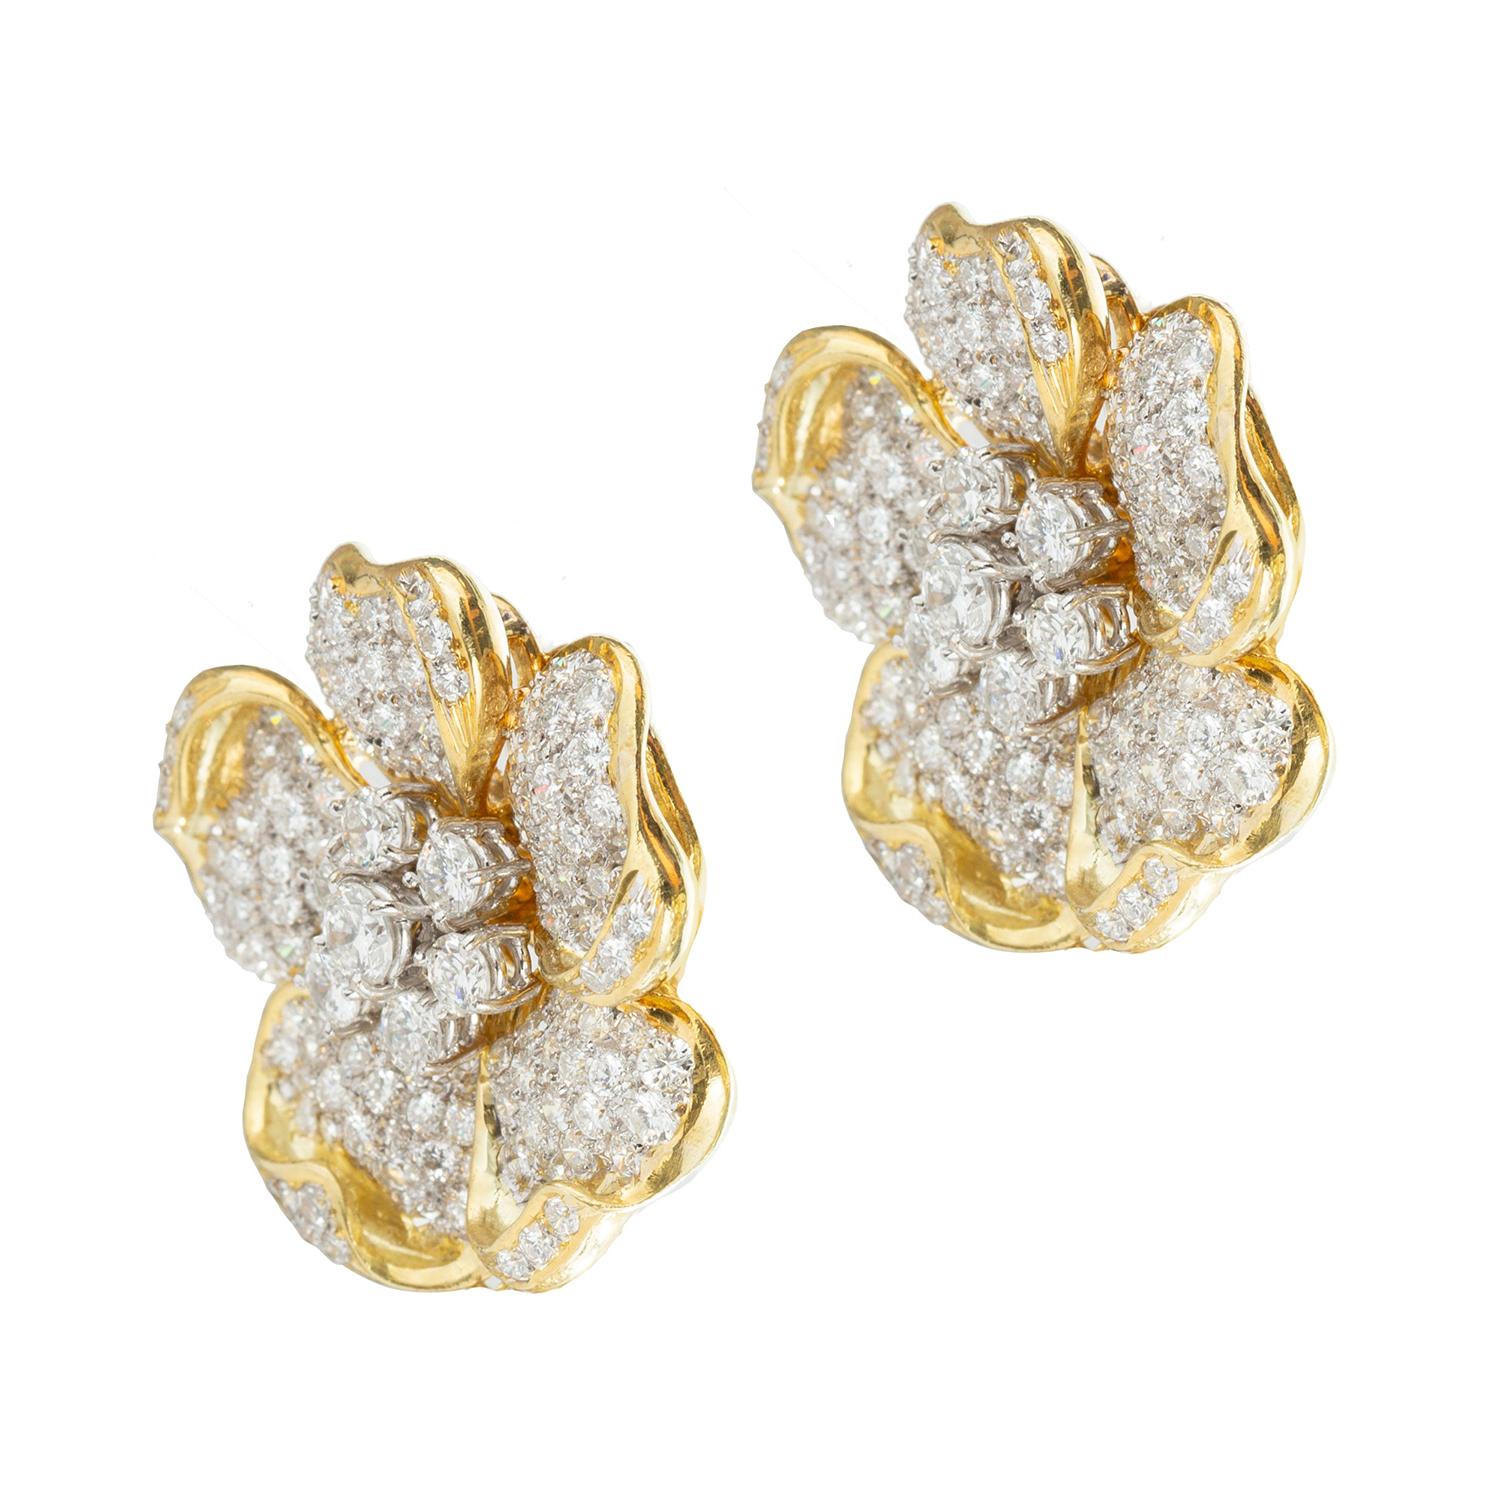 Flower motif earrings in 18k yellow and white gold pave-set with round brilliant-cut diamonds.  Diamonds weighing approximately 10 total carats.  Clip backs (posts may be added upon customer request).  1.1